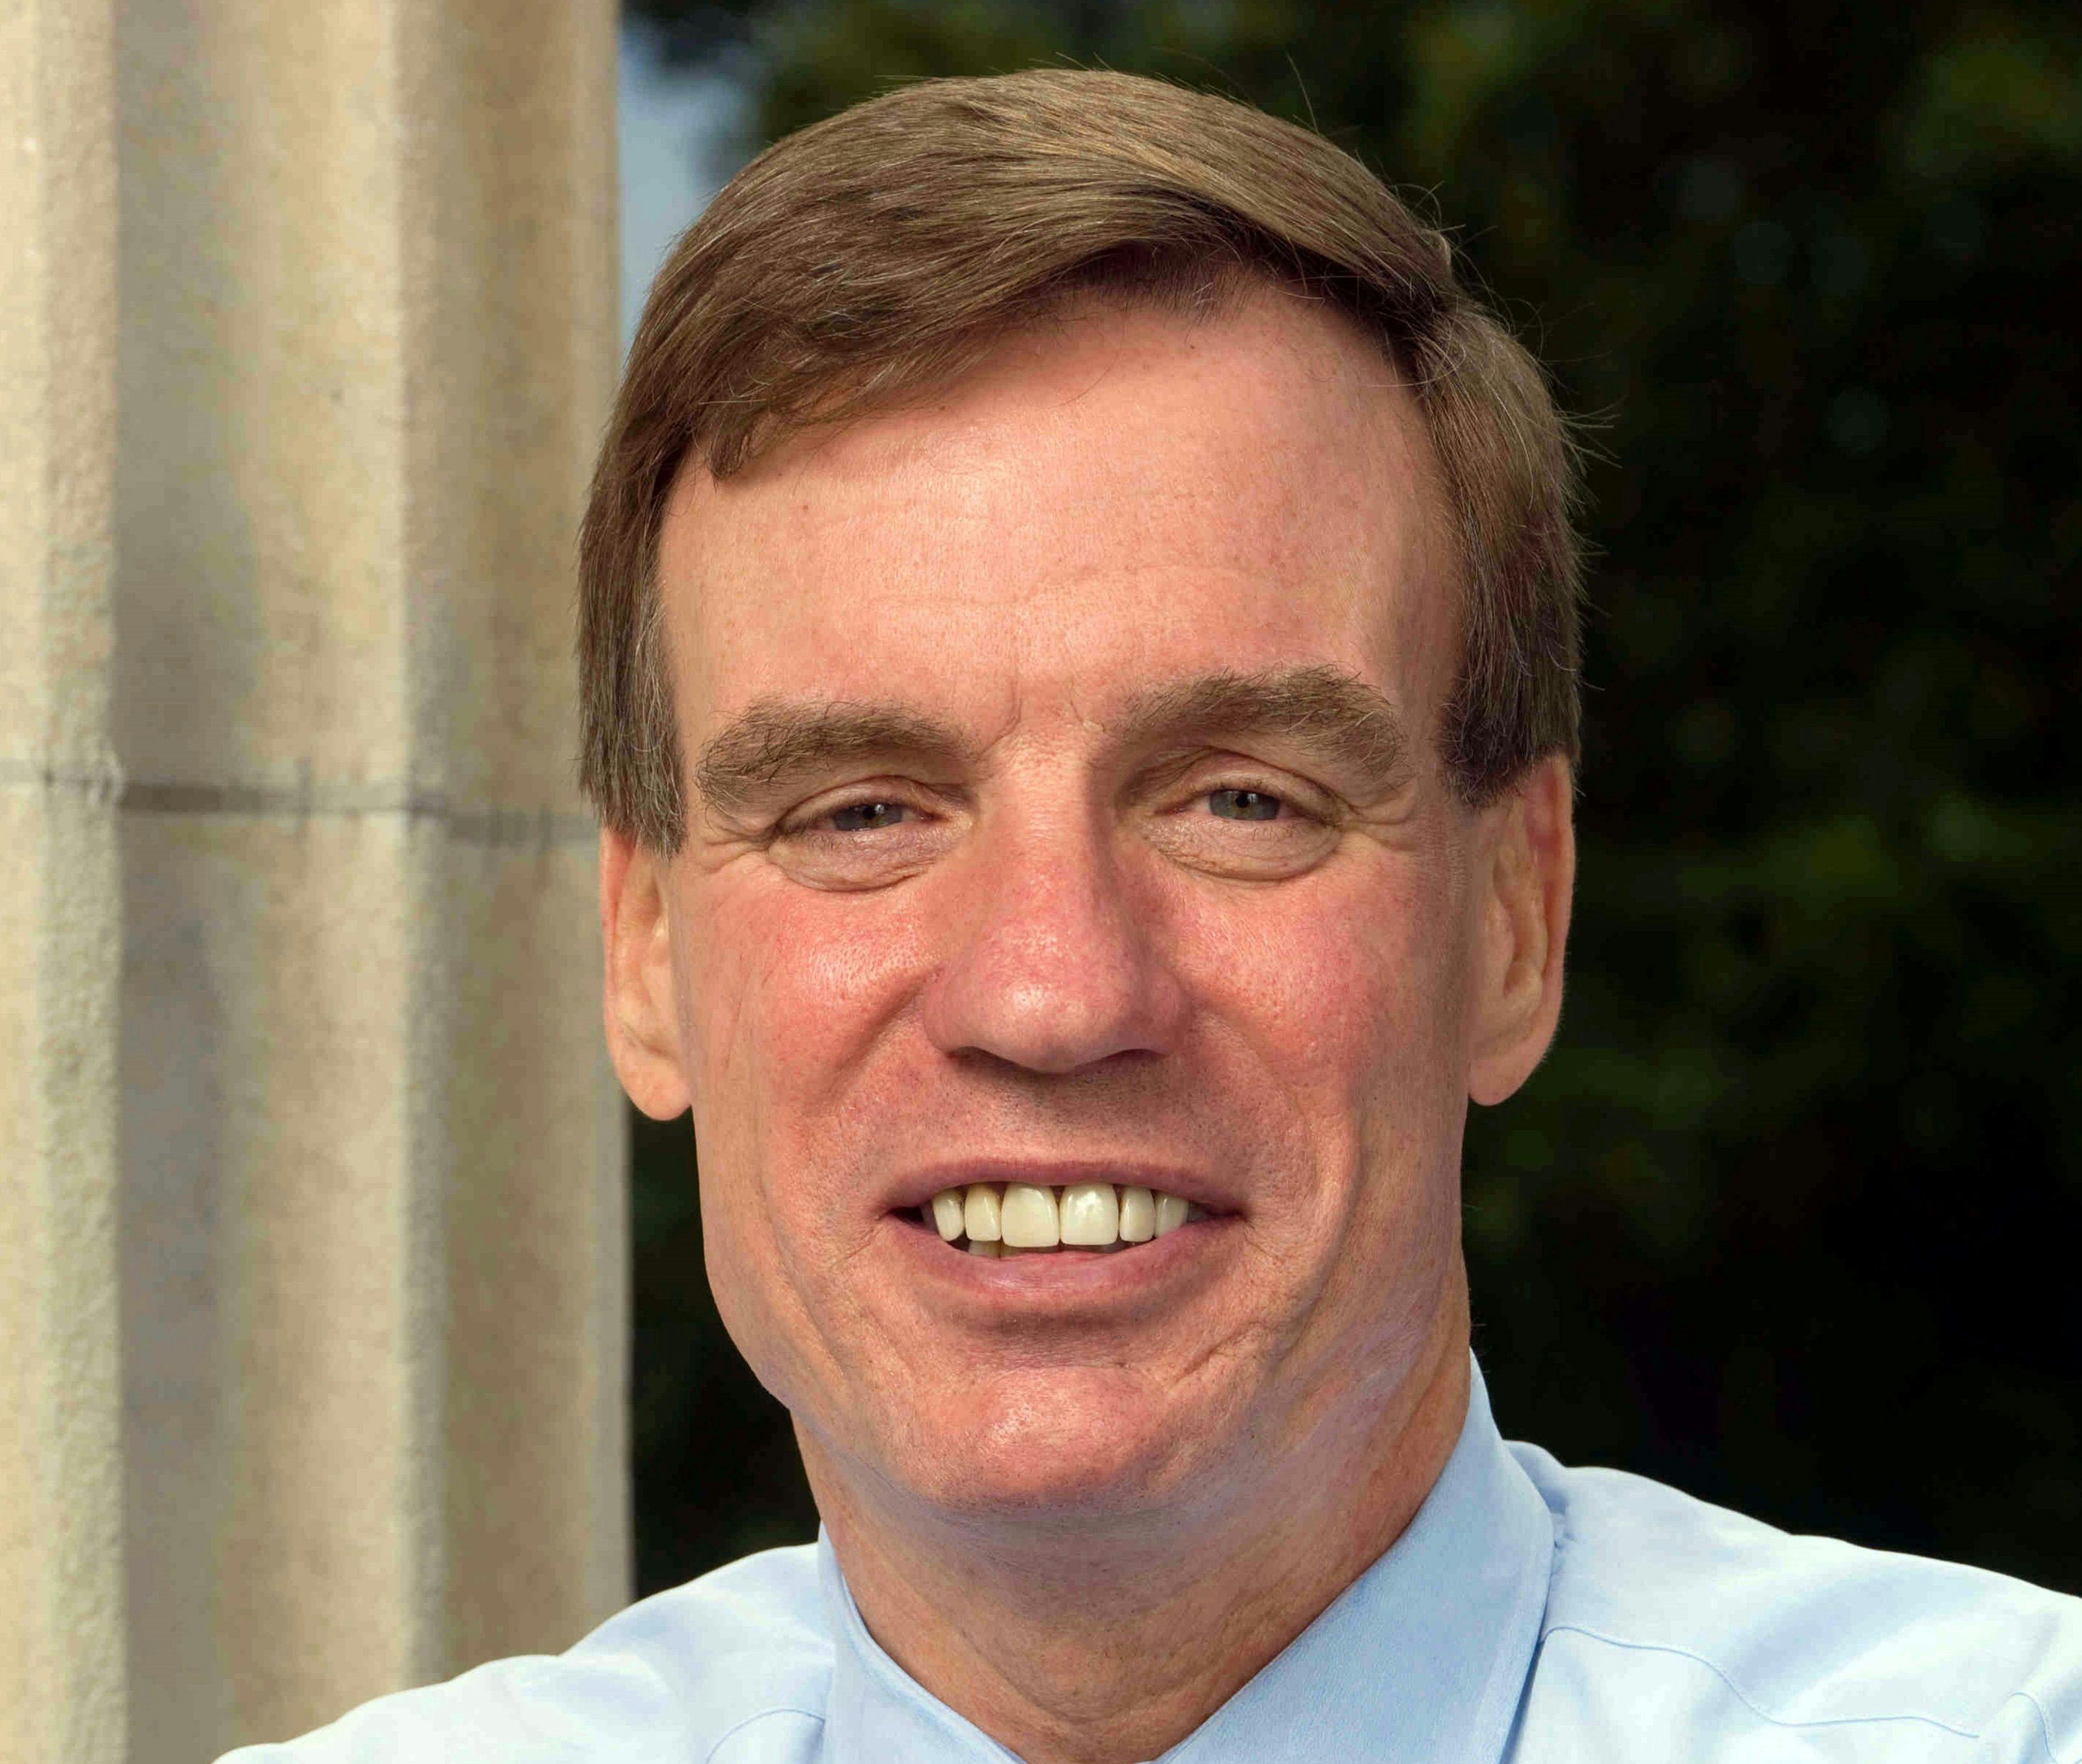 Sen. Mark Warner talks about cybersecurity in healthcare: ‘Lives are at stake’